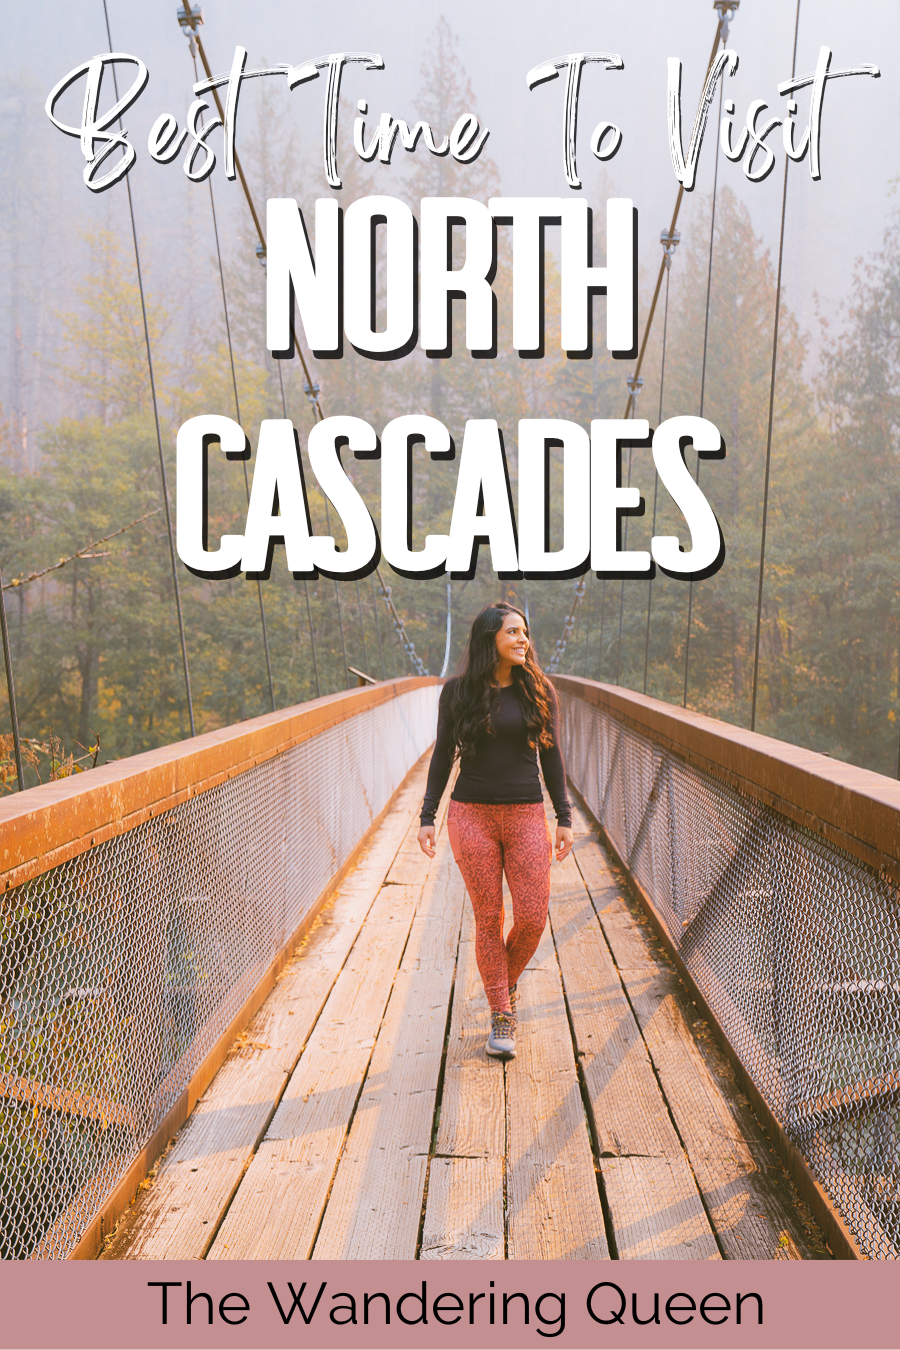 Best Time to Visit North Cascades National Park